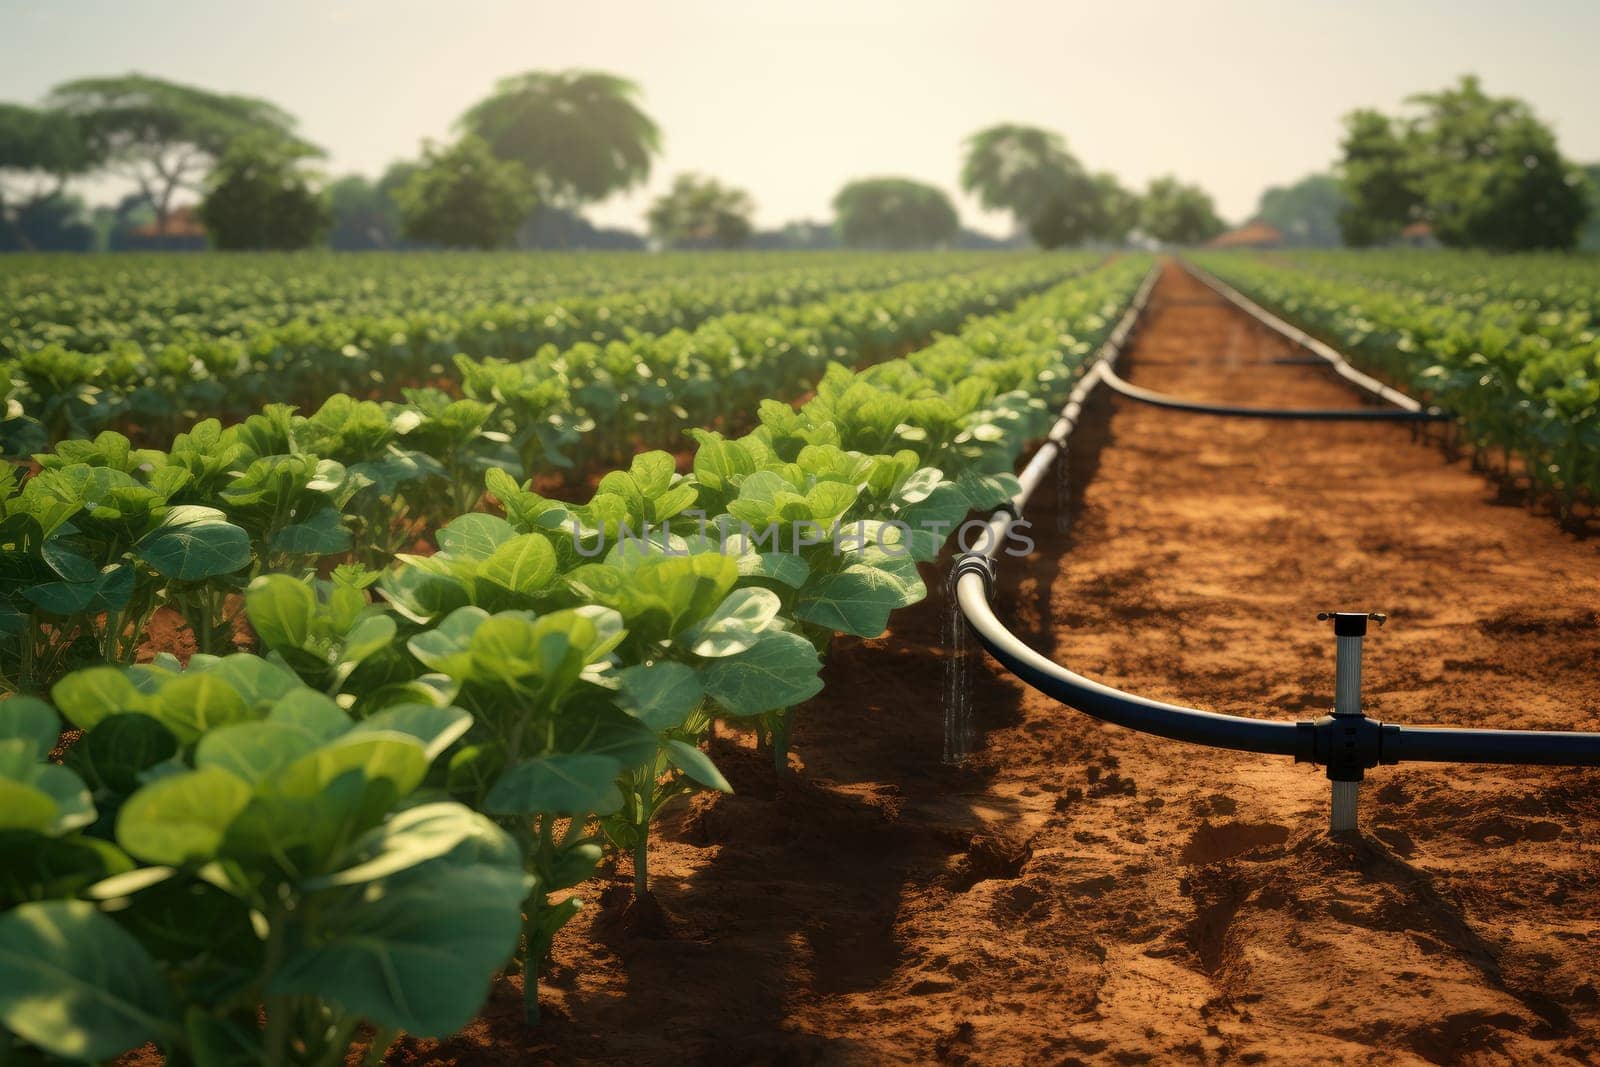 A close-up shot of modern drip irrigation technology utilized in agricultural practices, showcasing water conservation and efficient resource management.